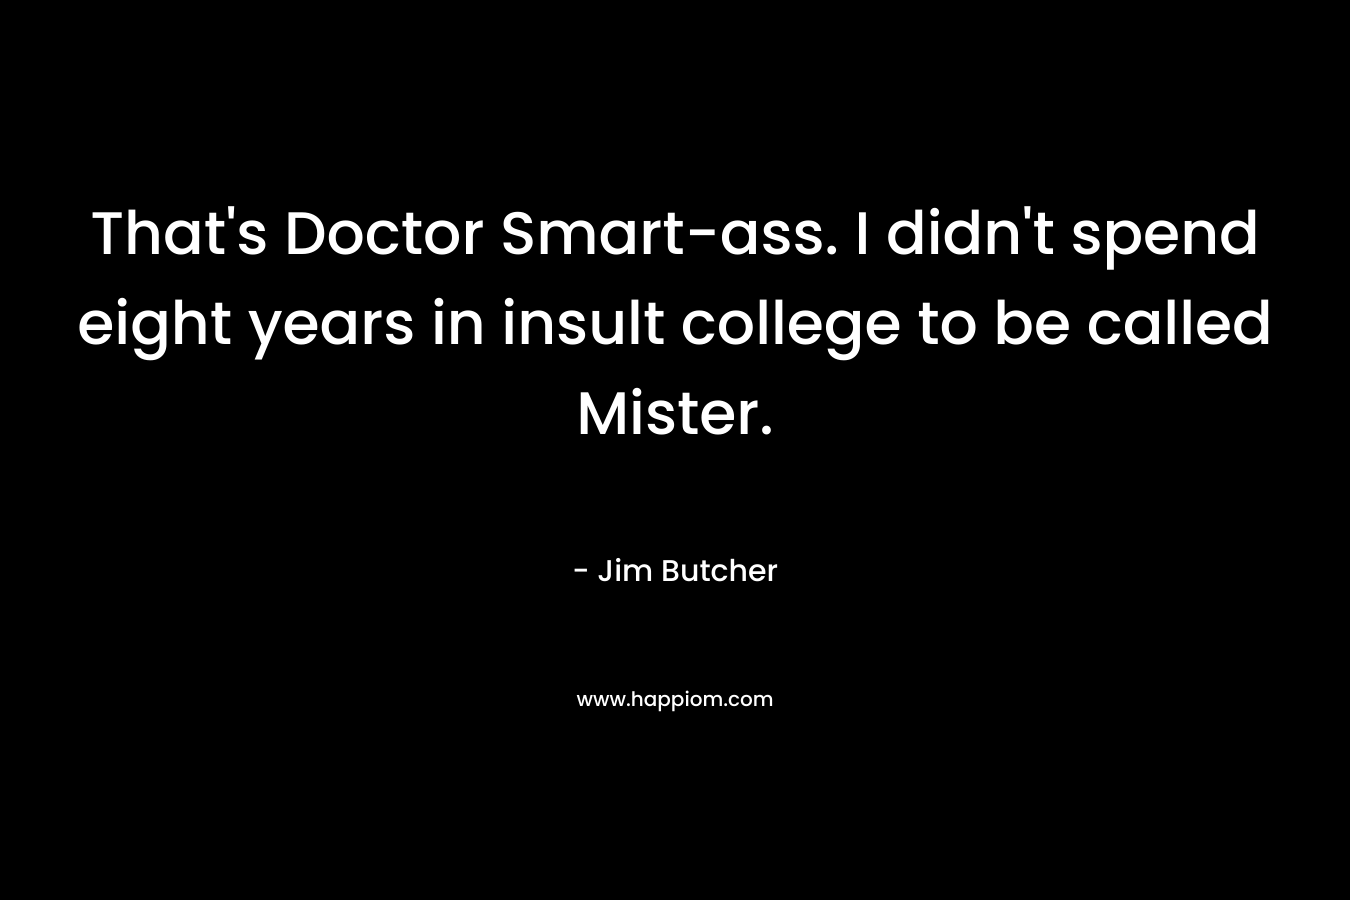 That’s Doctor Smart-ass. I didn’t spend eight years in insult college to be called Mister. – Jim Butcher